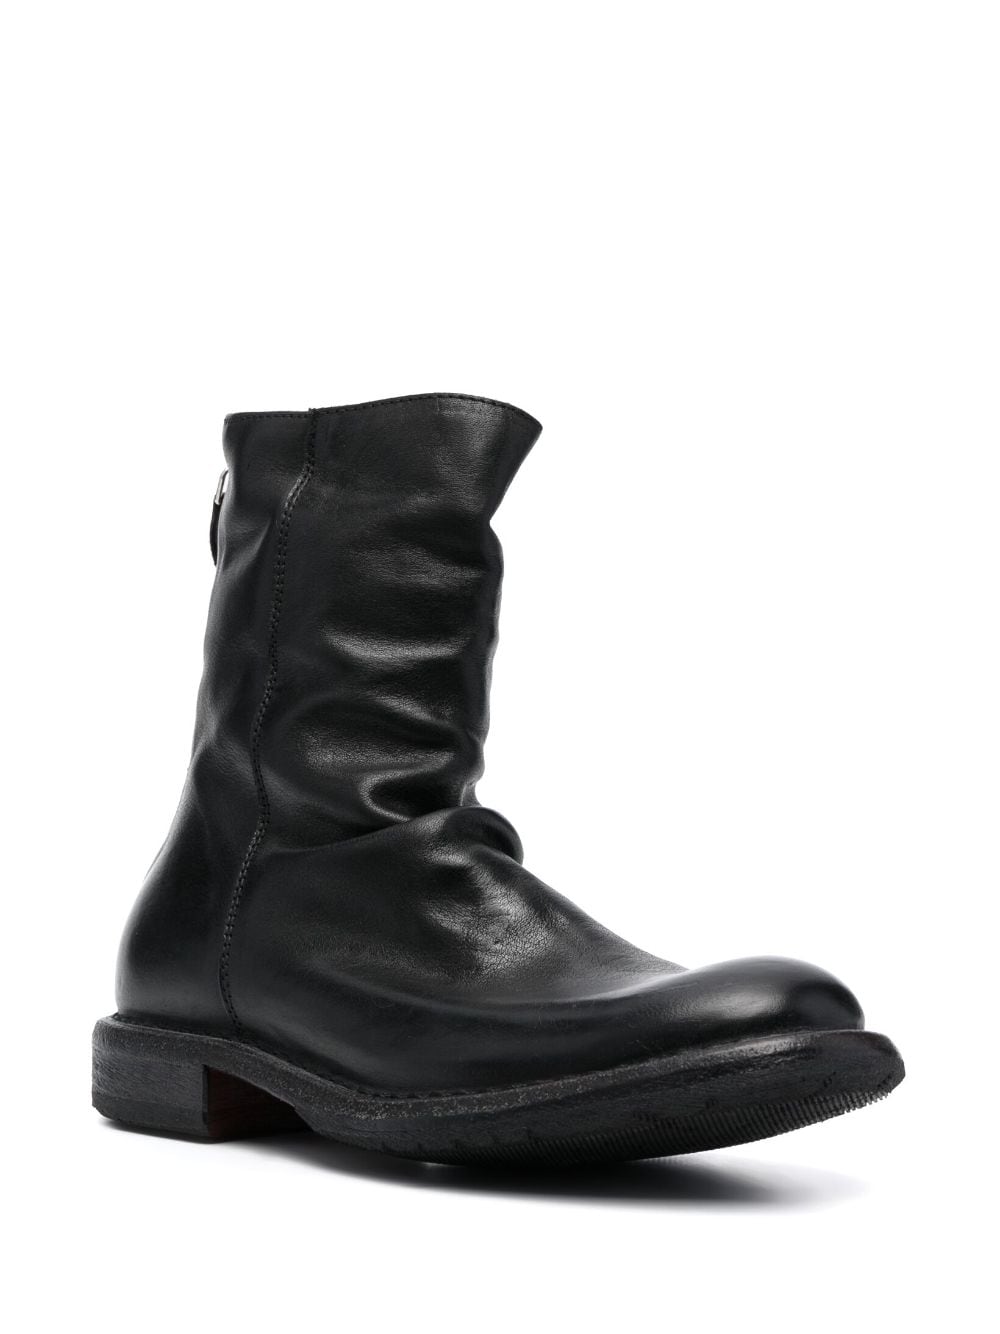 Image 2 of Moma Tronchetto leather ankle boots